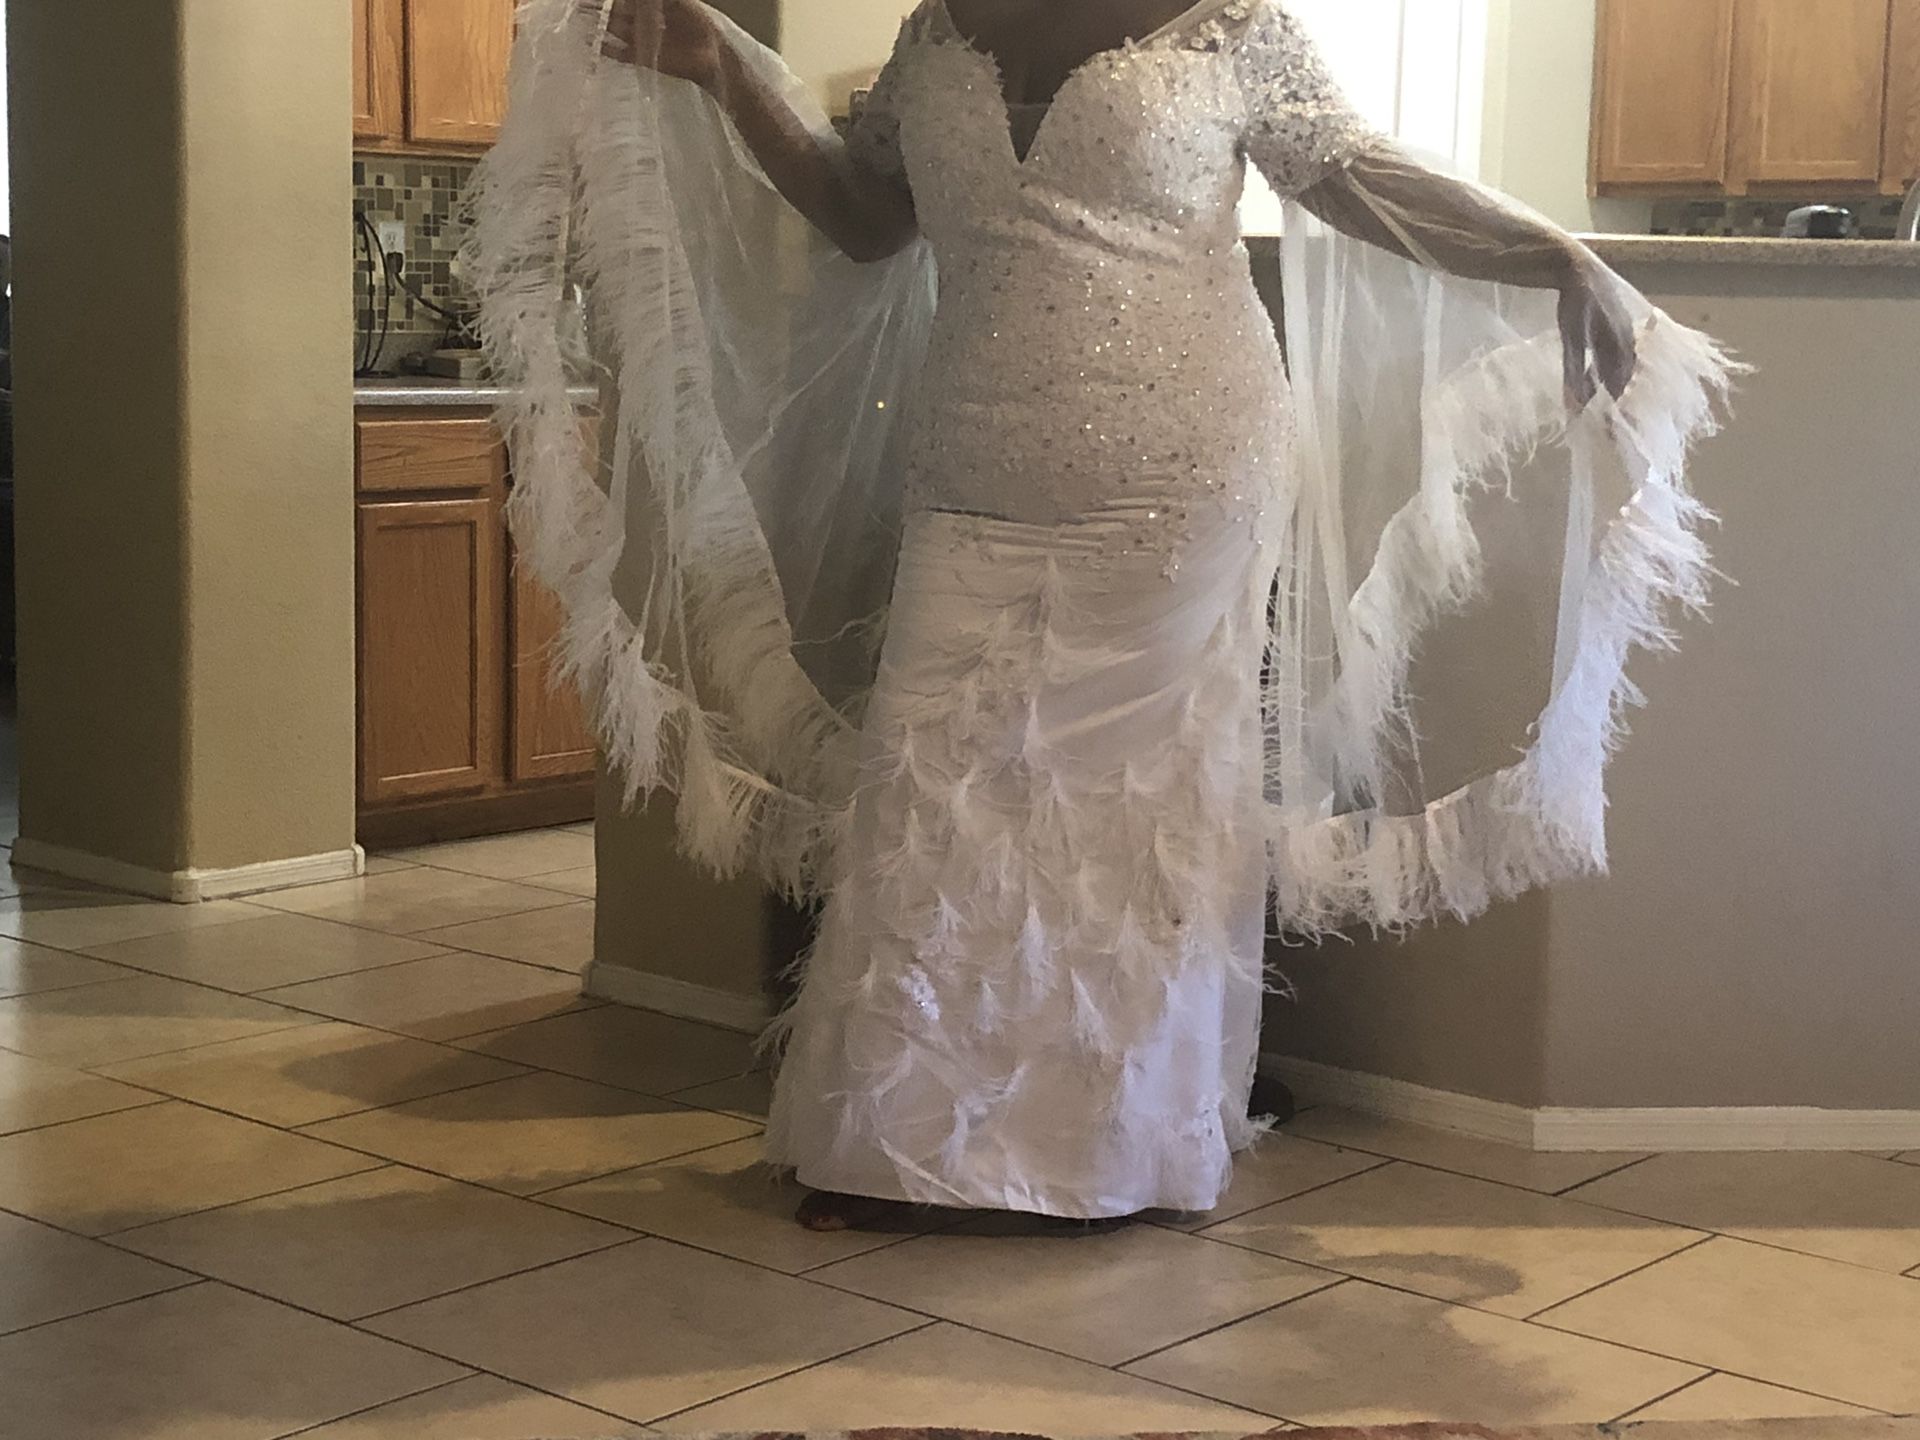 Brand new couture Wedding dress